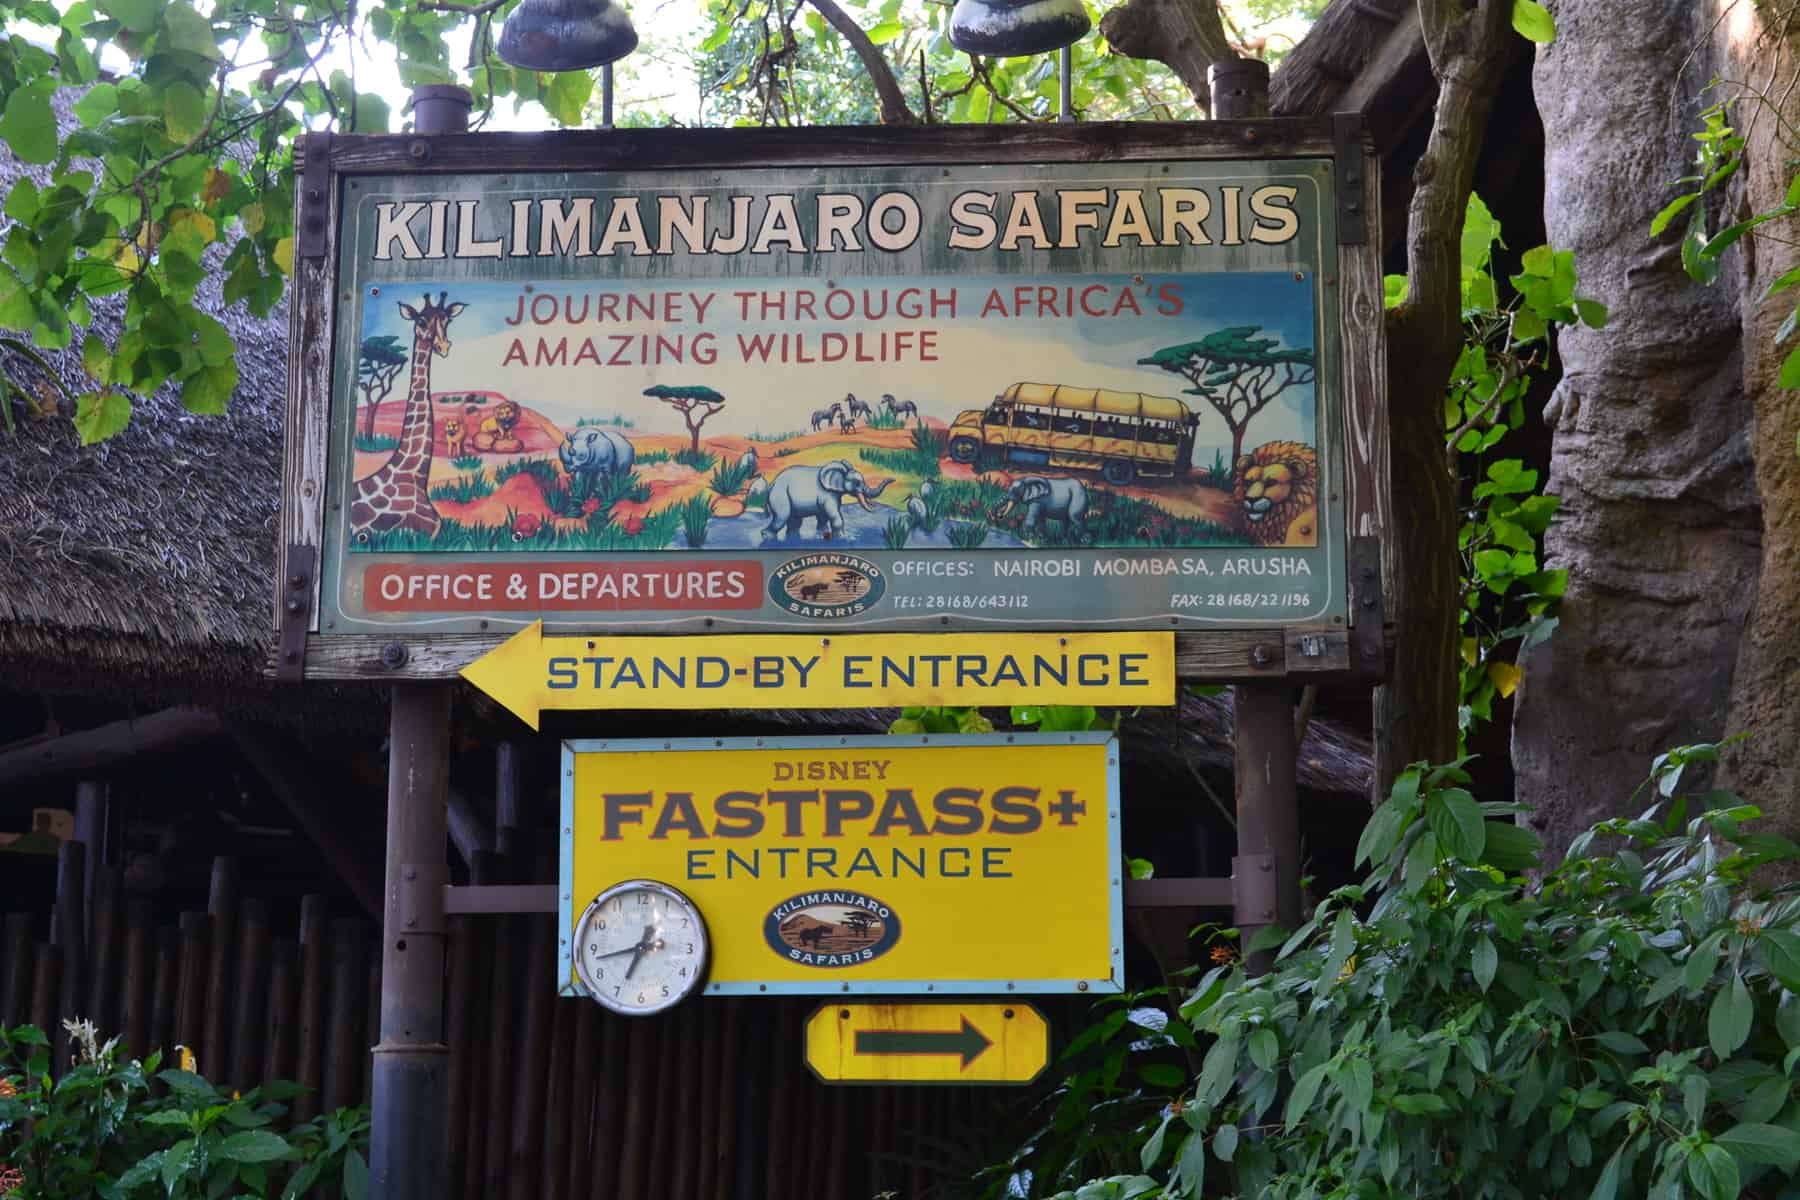 Animal Kingdom touring plans (and FastPass+ recommendations)